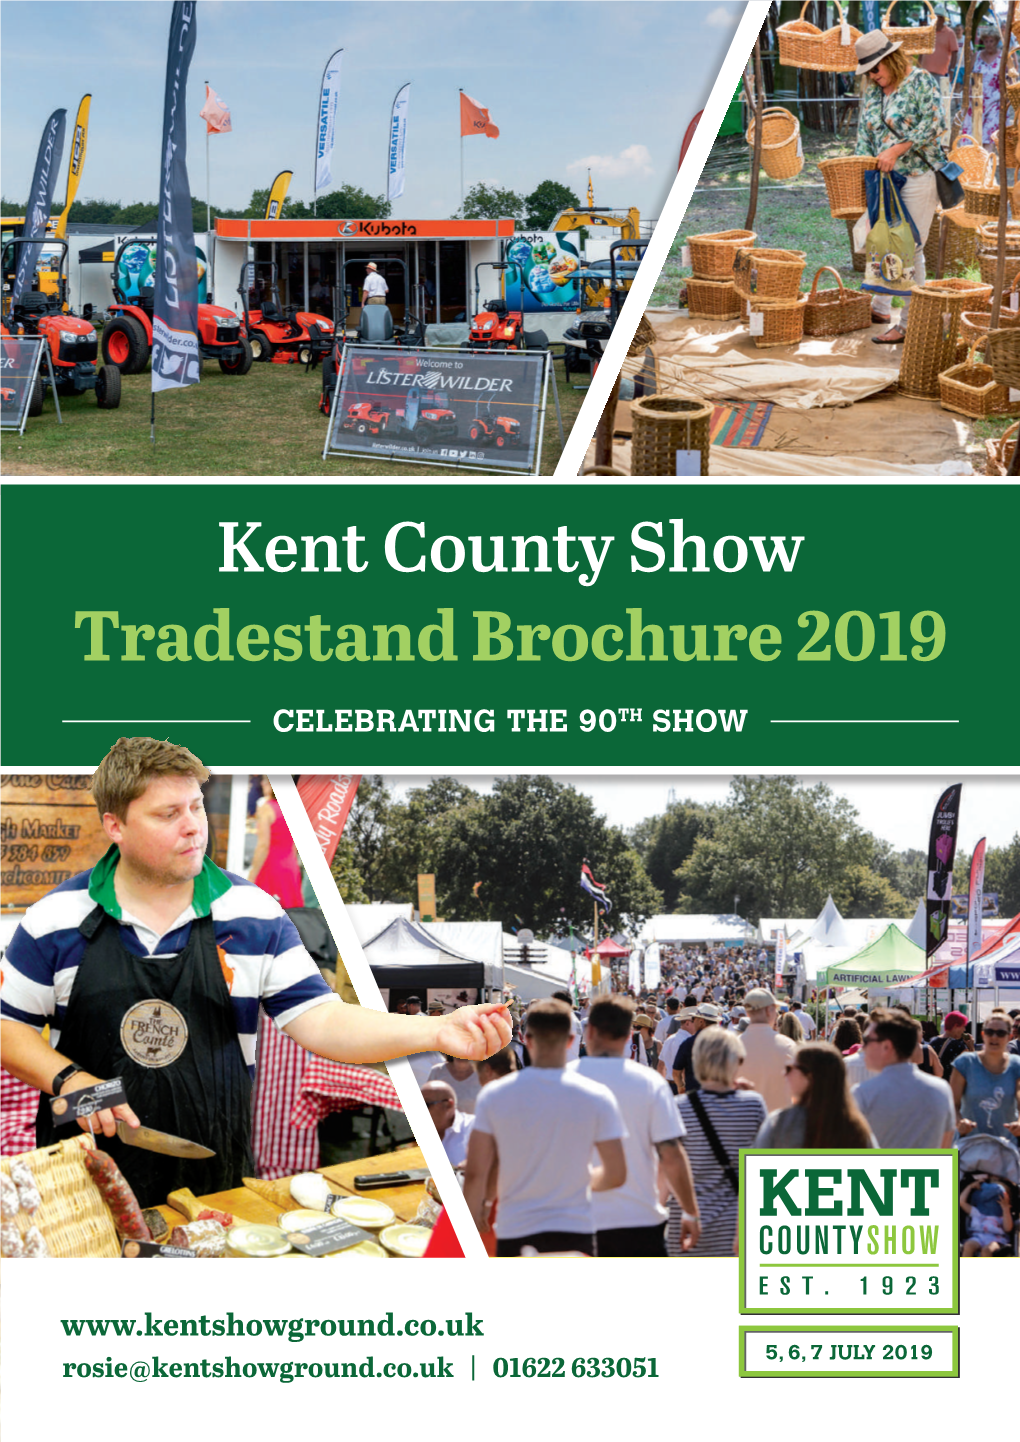 Kent County Show Tradestand Brochure 2019 CELEBRATING the 90TH SHOW